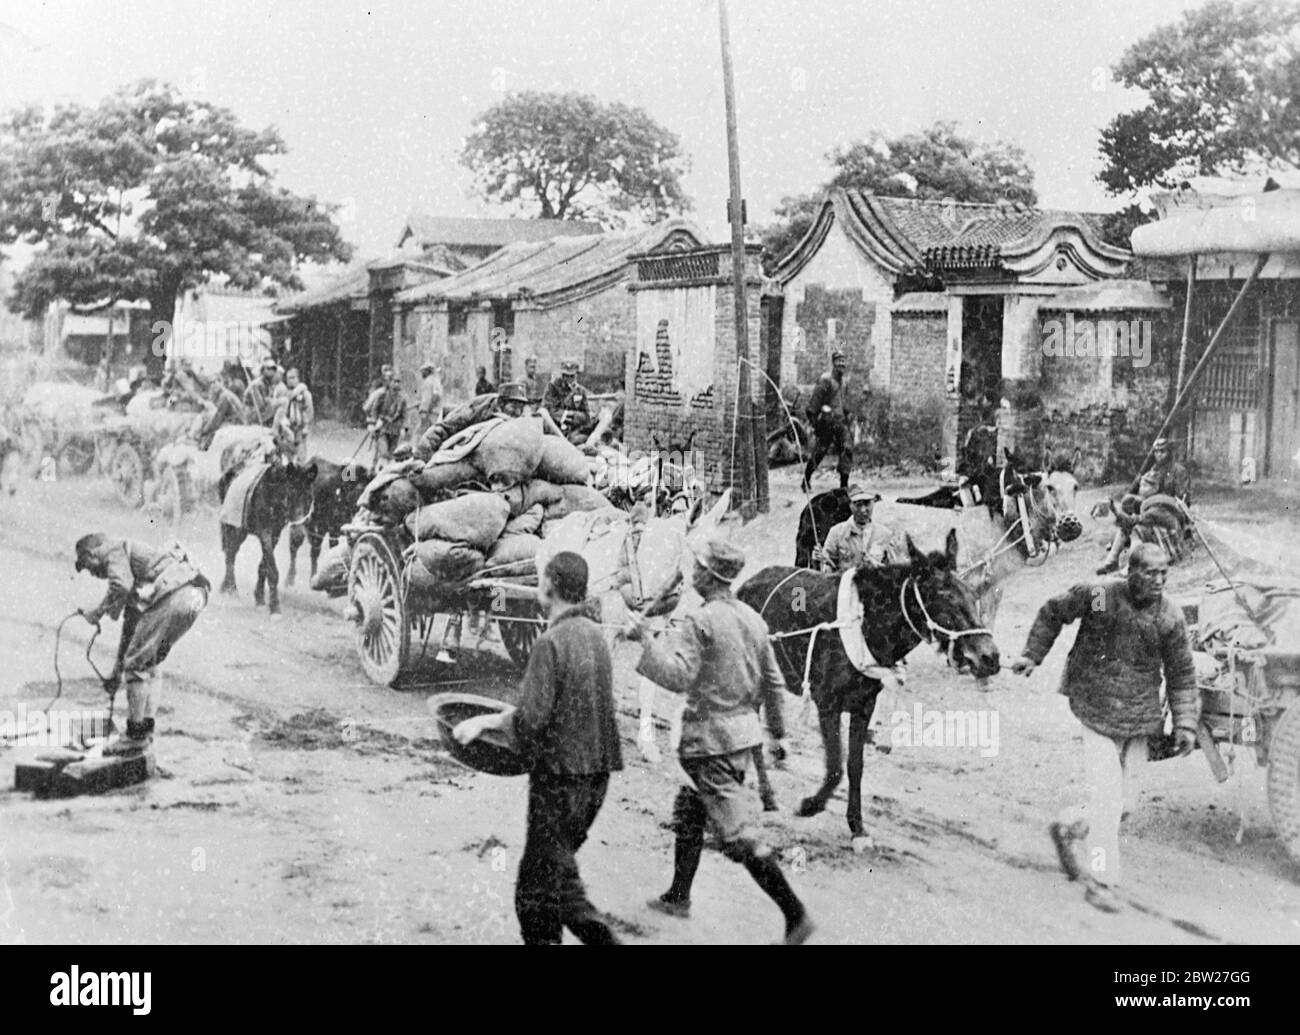 Hundreds of refugees flee the city, whilst fierce fighting is now in progress between Chinese and Japanese troops at the very gates of Pekin. The Japenese are reported to have retreated after desperate hand to hand fighting but ten thousand more troops are reported on the move. 13 July 1937. Stock Photo